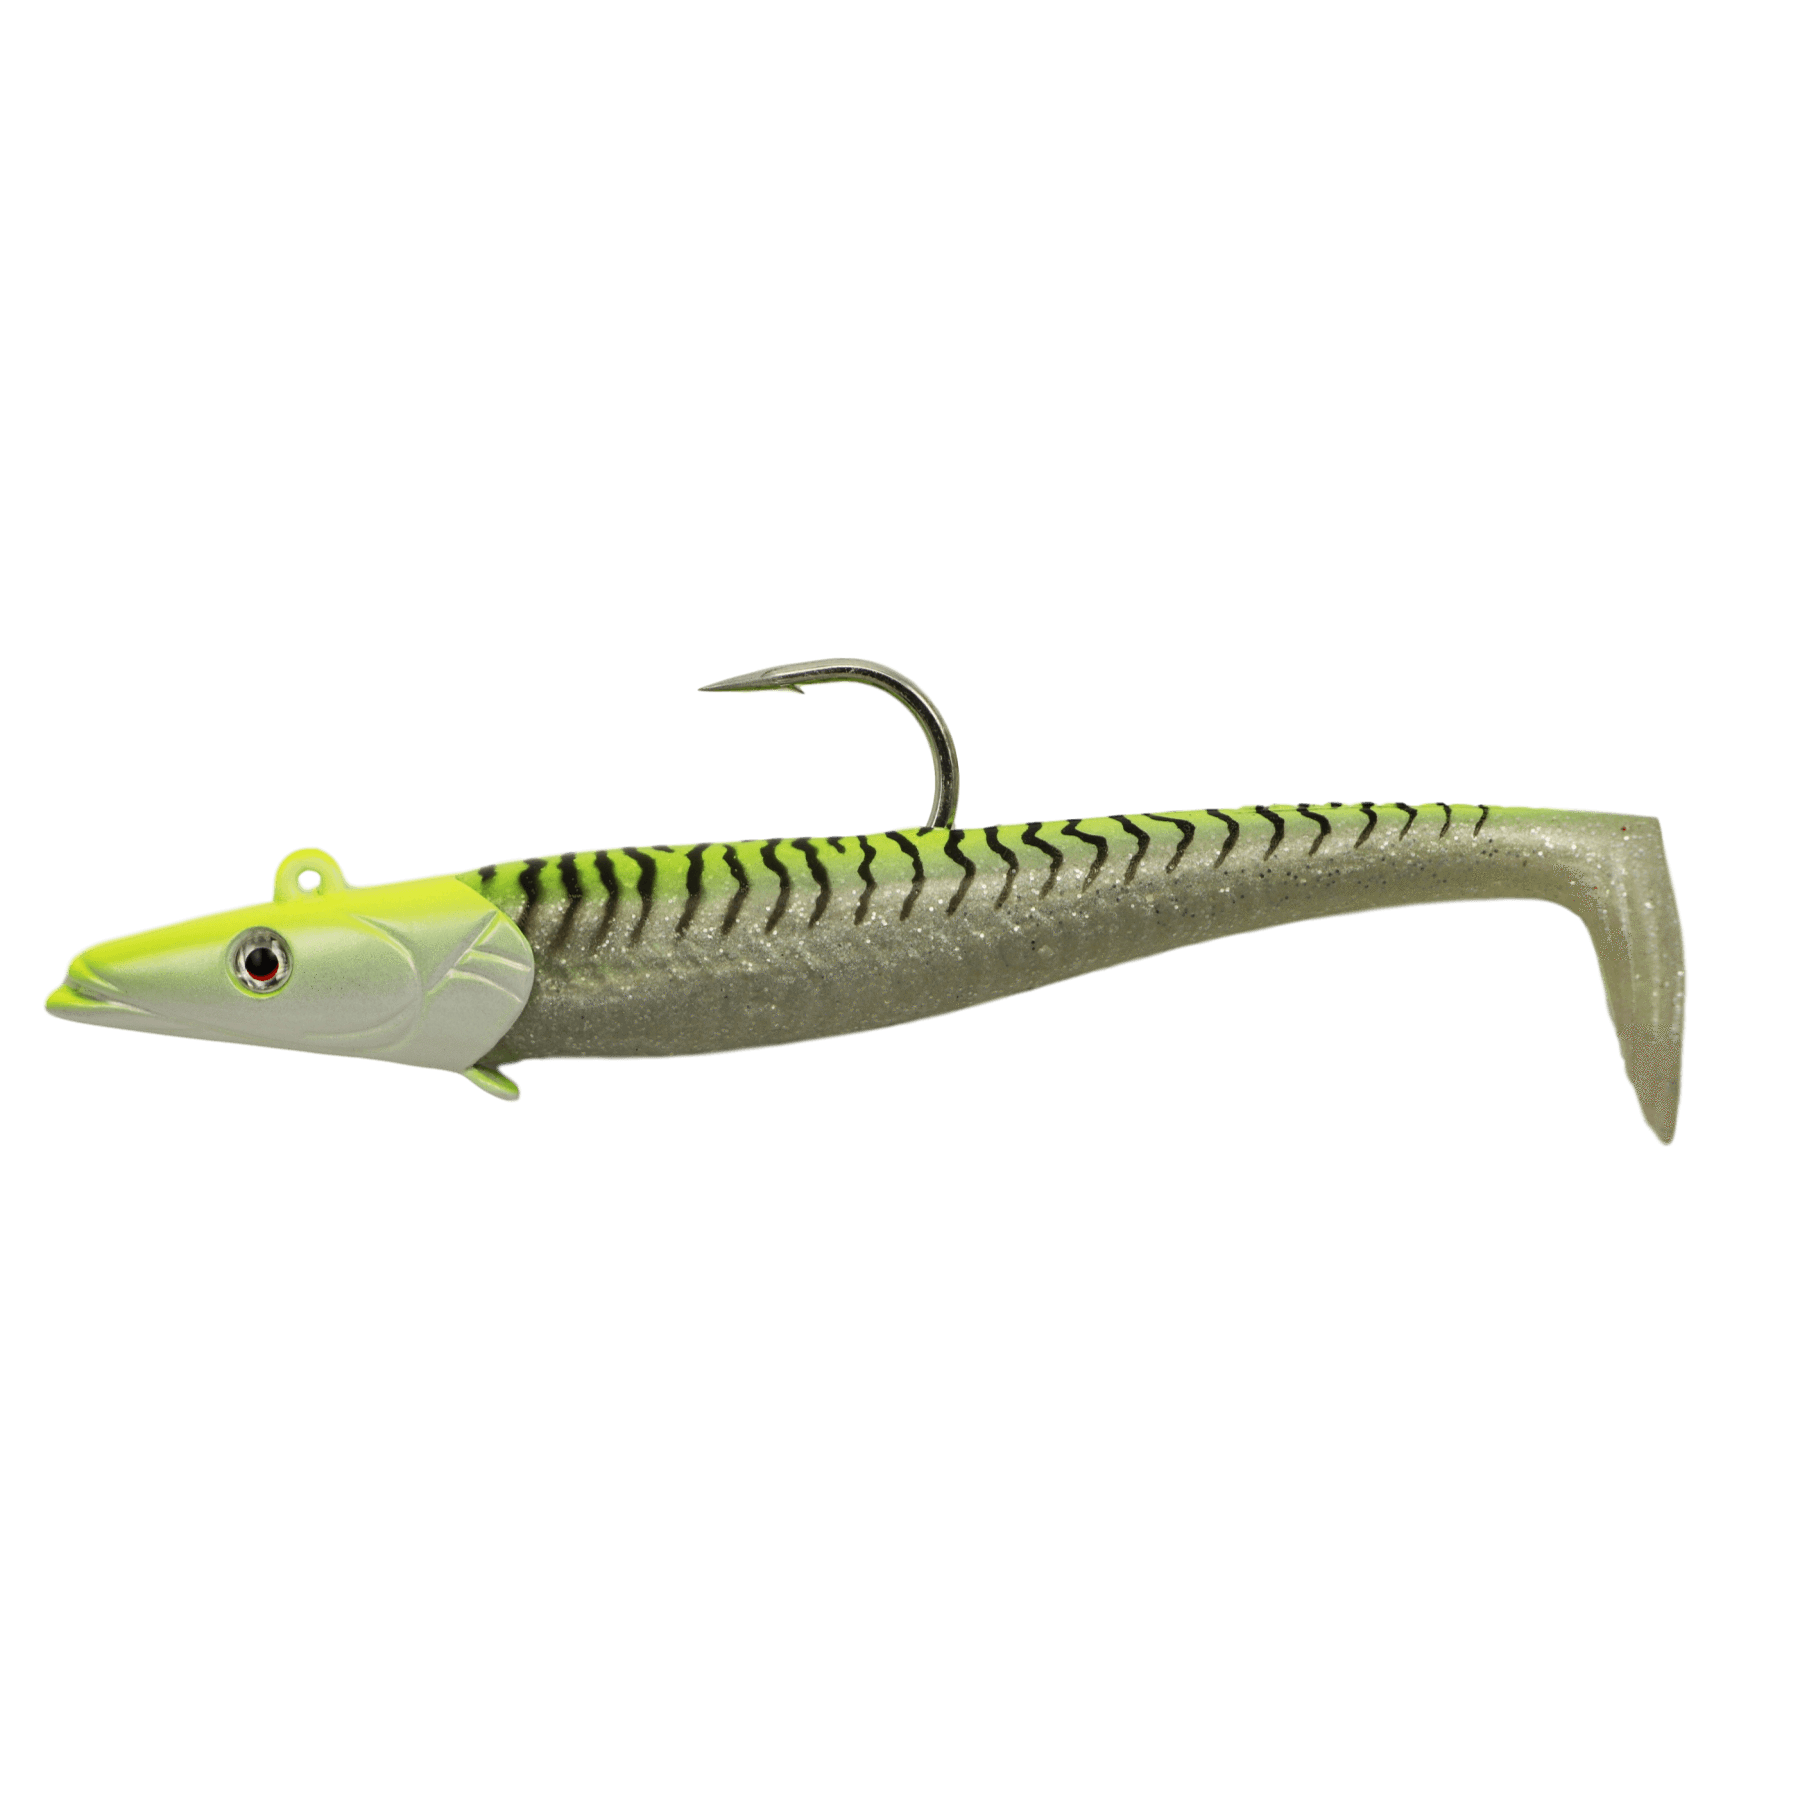  Savage Gear Sandeel Fishing Bait, 1 1/2 oz, Chartreuse White,  Realistic Contours & Movement, Durable Construction, Two Tie Points, 5X  Hooks, Holographic Eyes, Bait Keeper : Sports & Outdoors